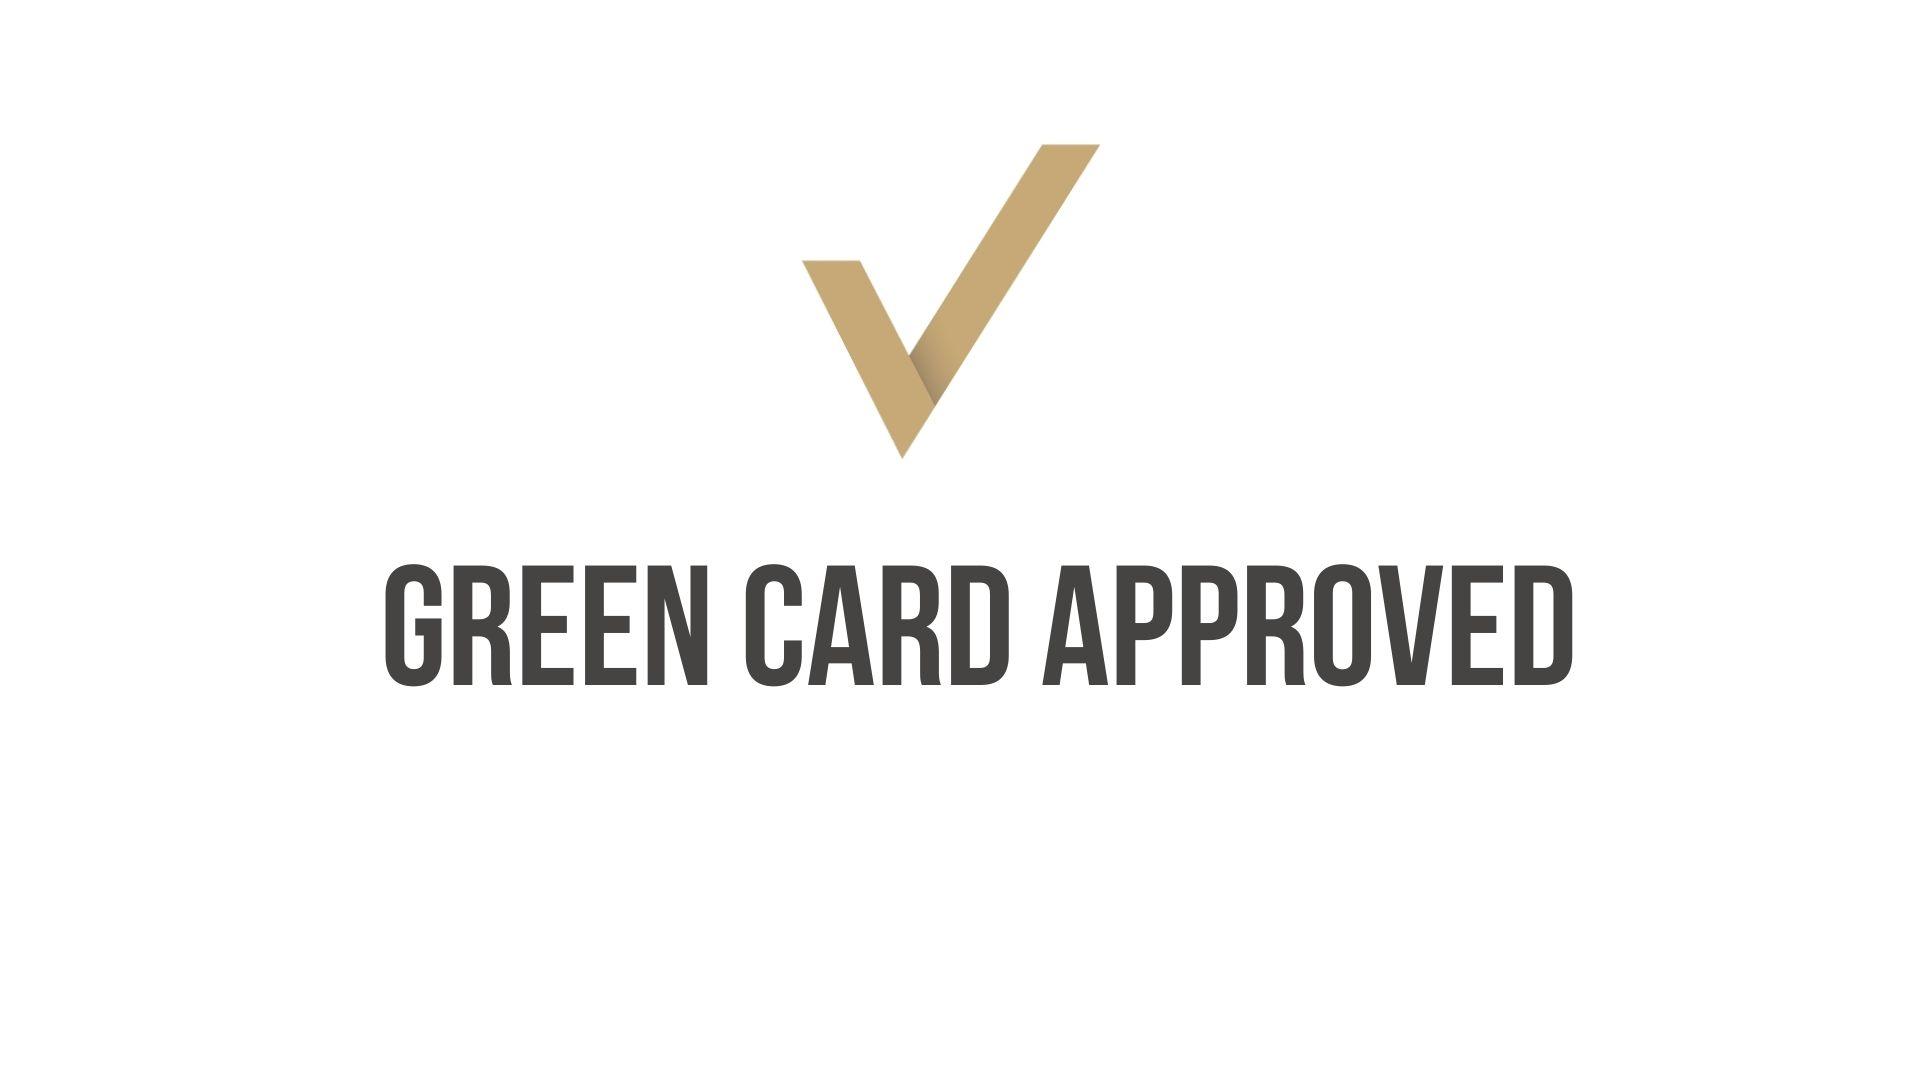 Family – Based Green Card Approval (I-130 Petition and I-485 Adjustment of Status Application)